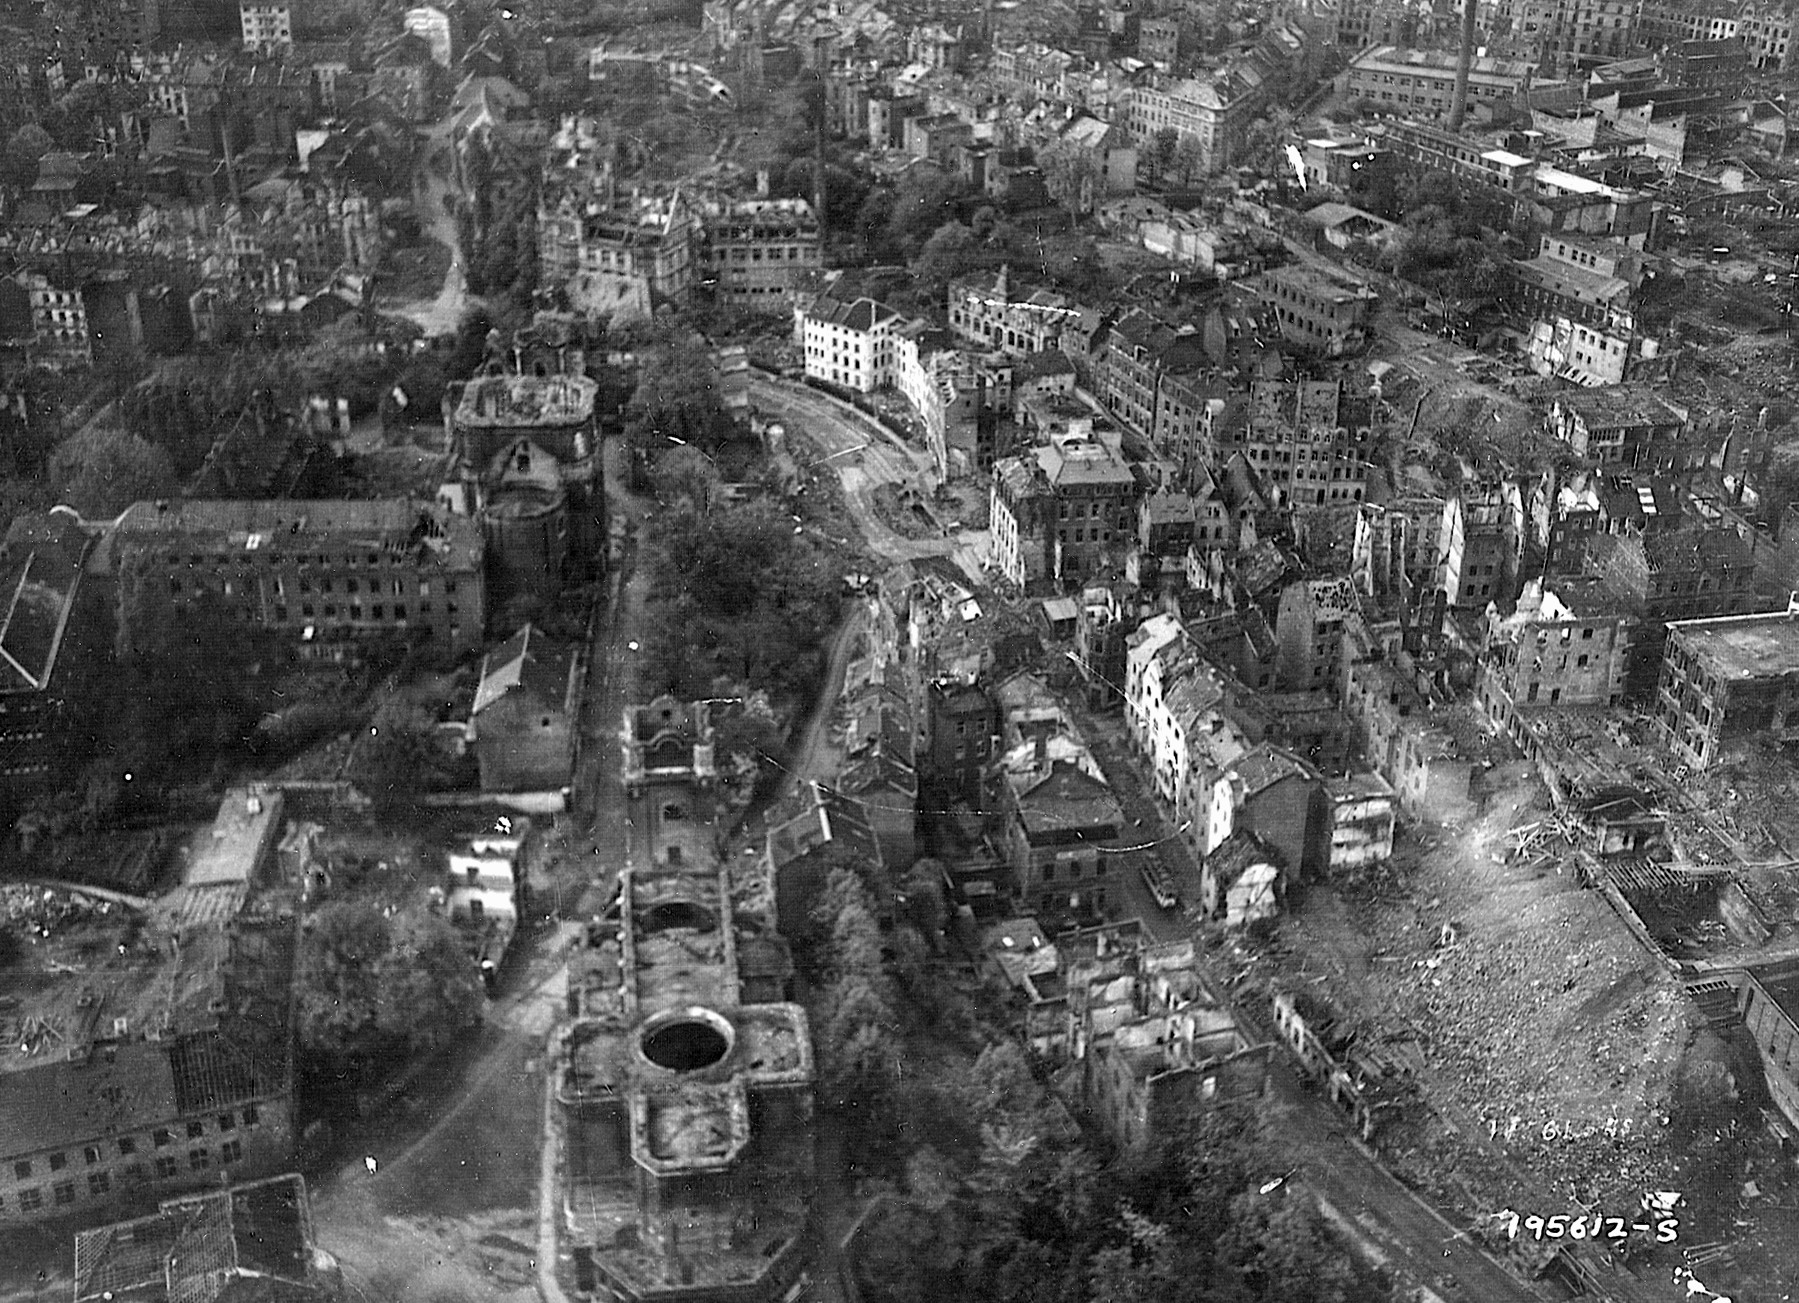 The domeless cathedral where Charlemagne was crowned Emperor of the Holy Roman Empire centuries earlier is visible in this aerial view of a devastated Aachen taken on October 24, 1944. Hitler was particularly insistent that Aachen be brutally defended since the city was in Germany and was significant in the nation’s history. (National Archives)